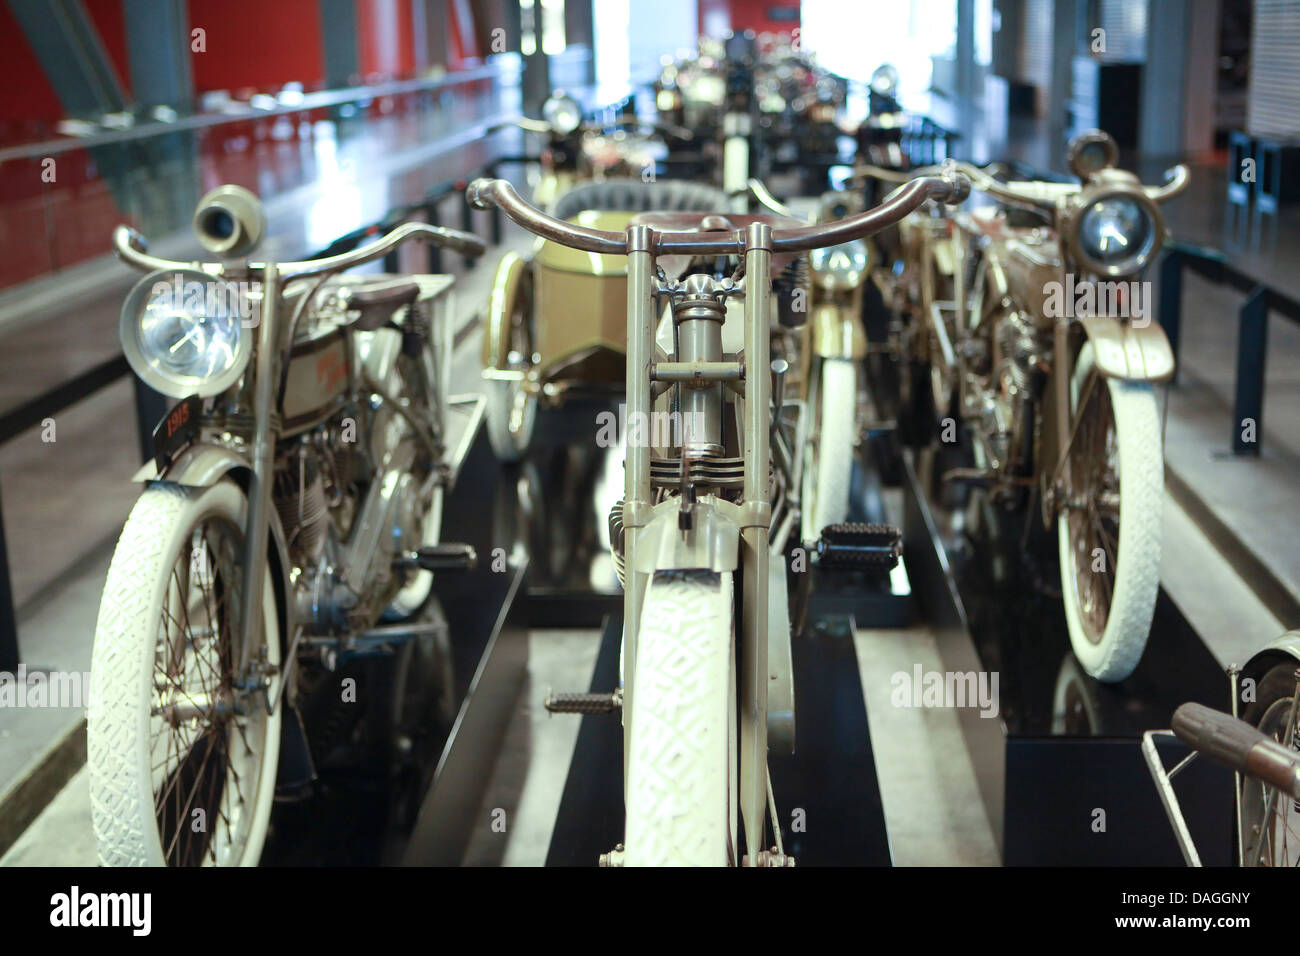 1900' Harley-Davidson motorcycles are seen on display at the Harley-Davidson museum in Milwaukee, Wisconsin Stock Photo